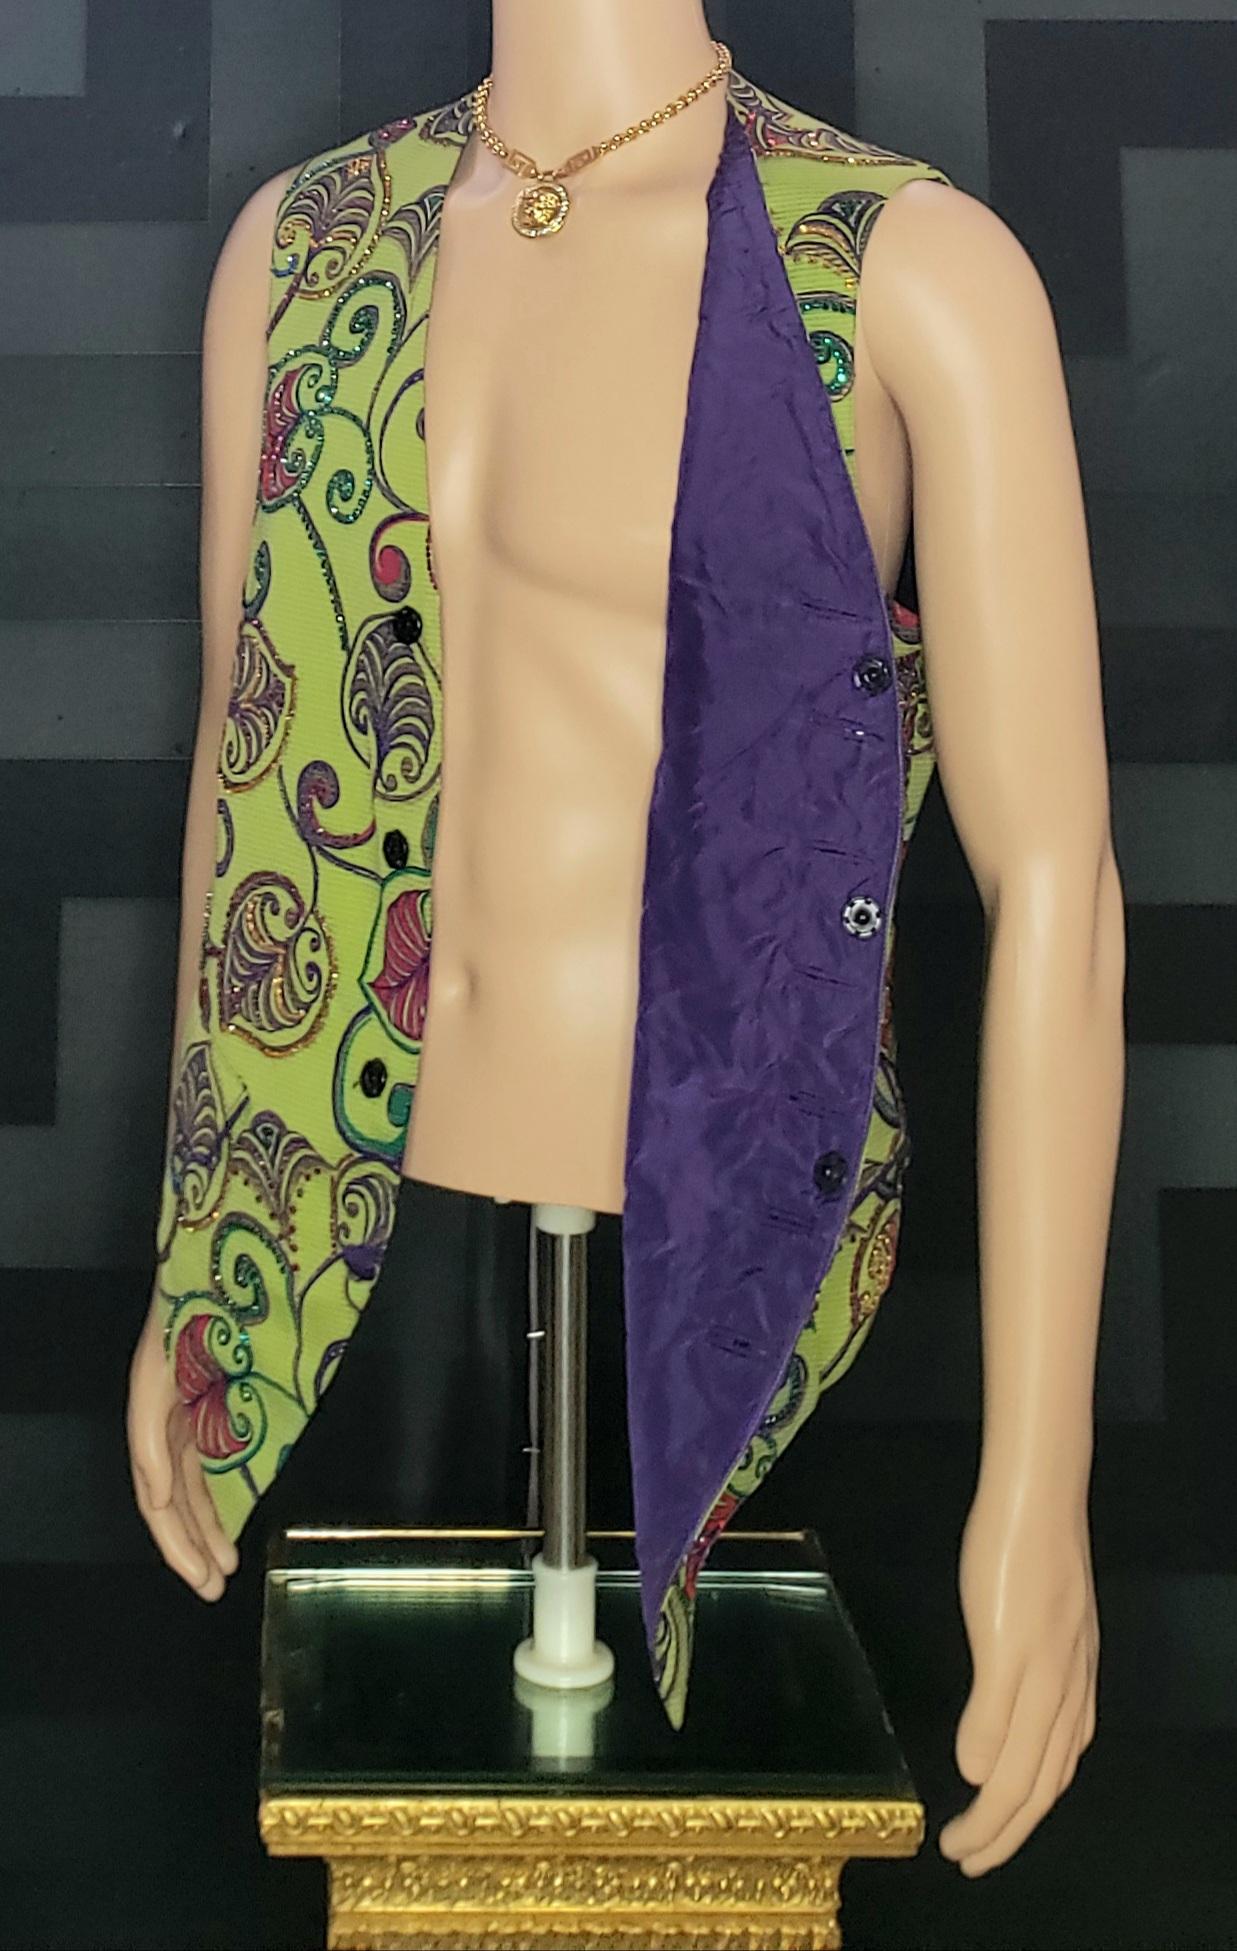 Men's 1991 GIANNI VERSACE PRIVATE COLLECTION SILK TWILL WAISTCOAT w/ SEQUIN EMBROIDERY For Sale